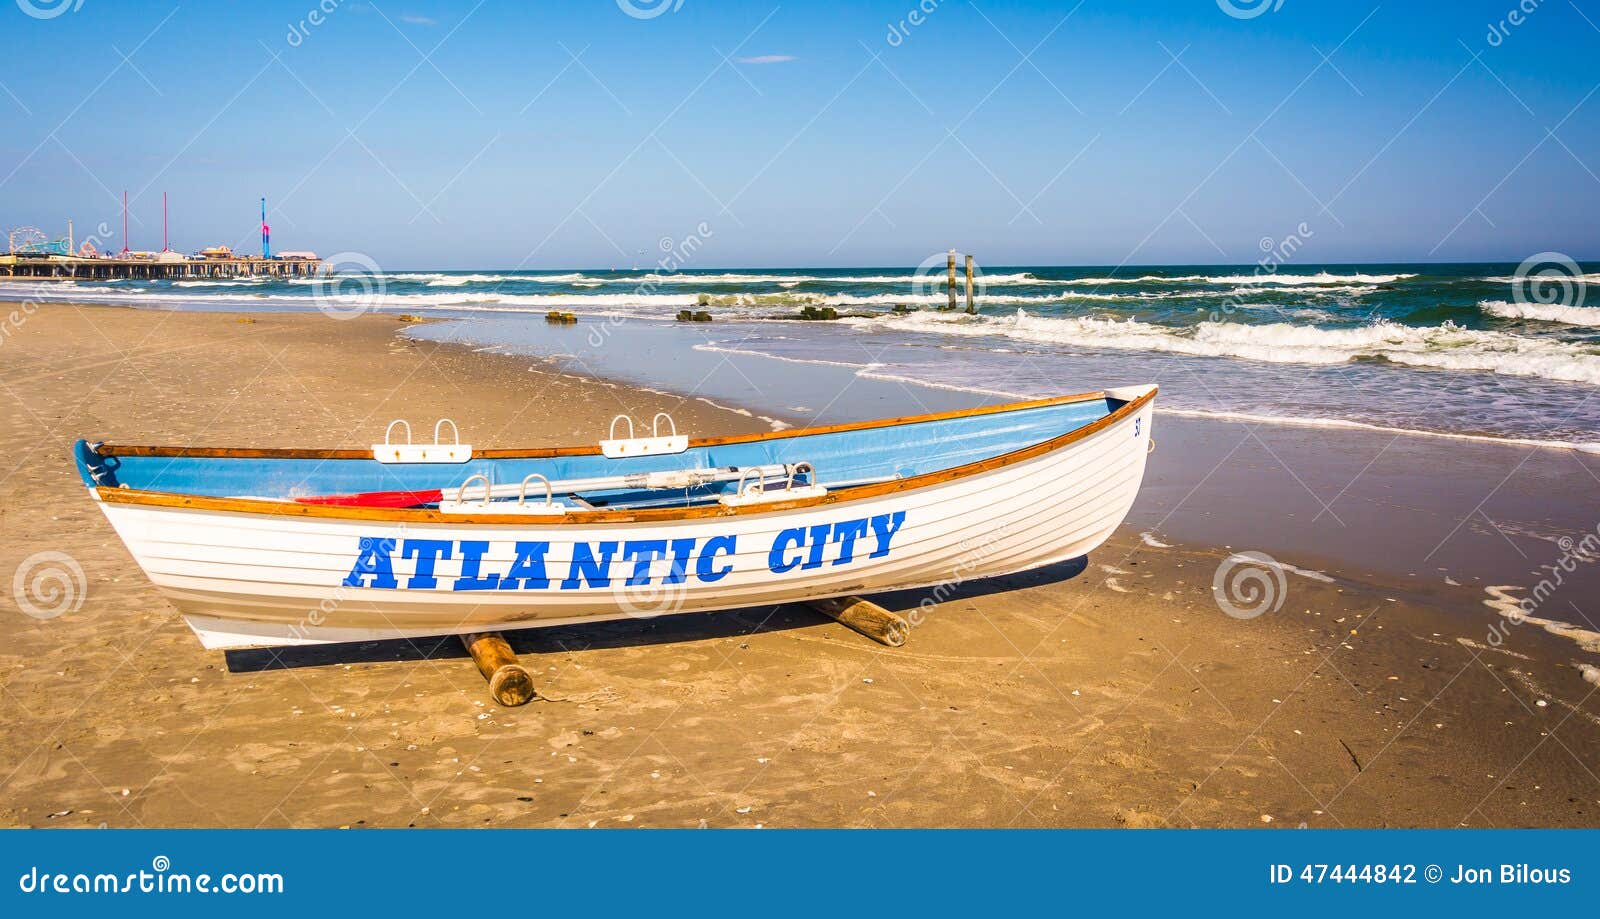 a lifeboat on the beach in atlantic city, new jersey.